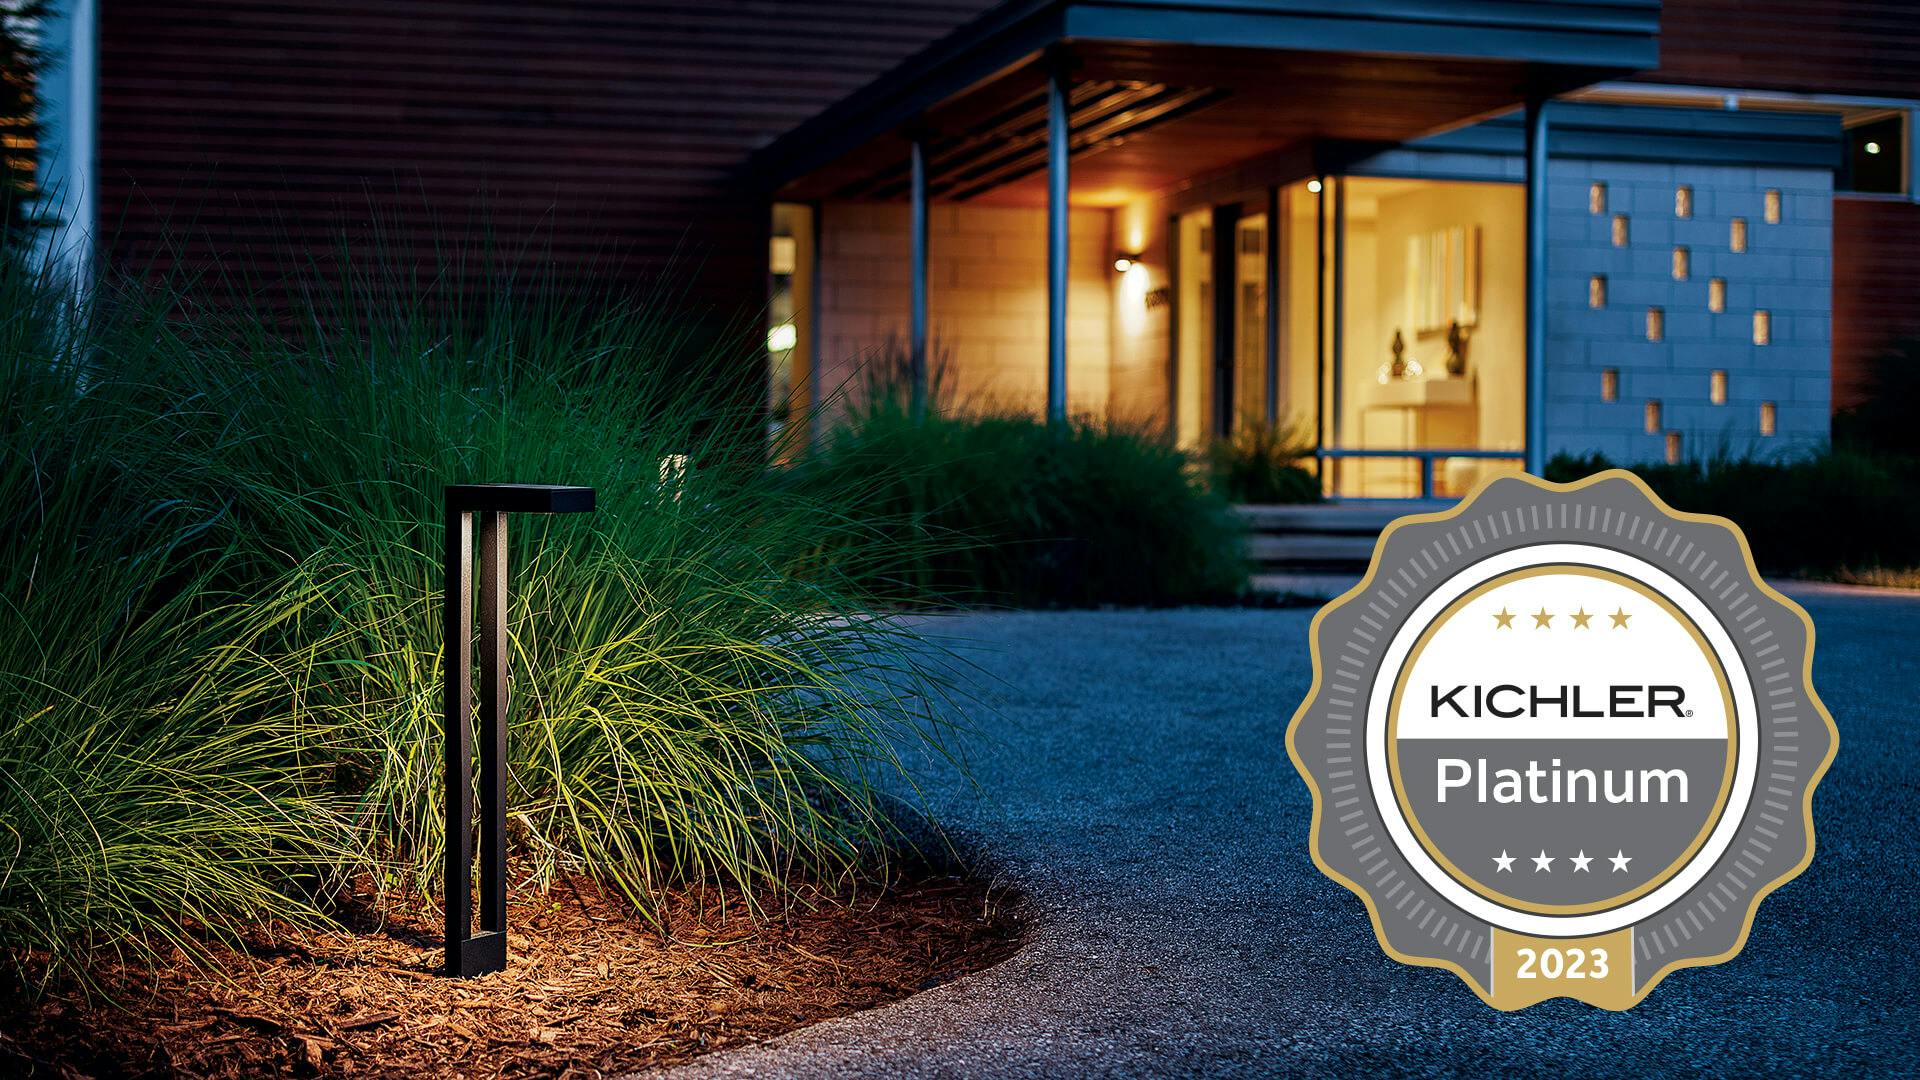 Residential landscape at night with a garden path light and featuring a Kichler Platinum 2023 Medal